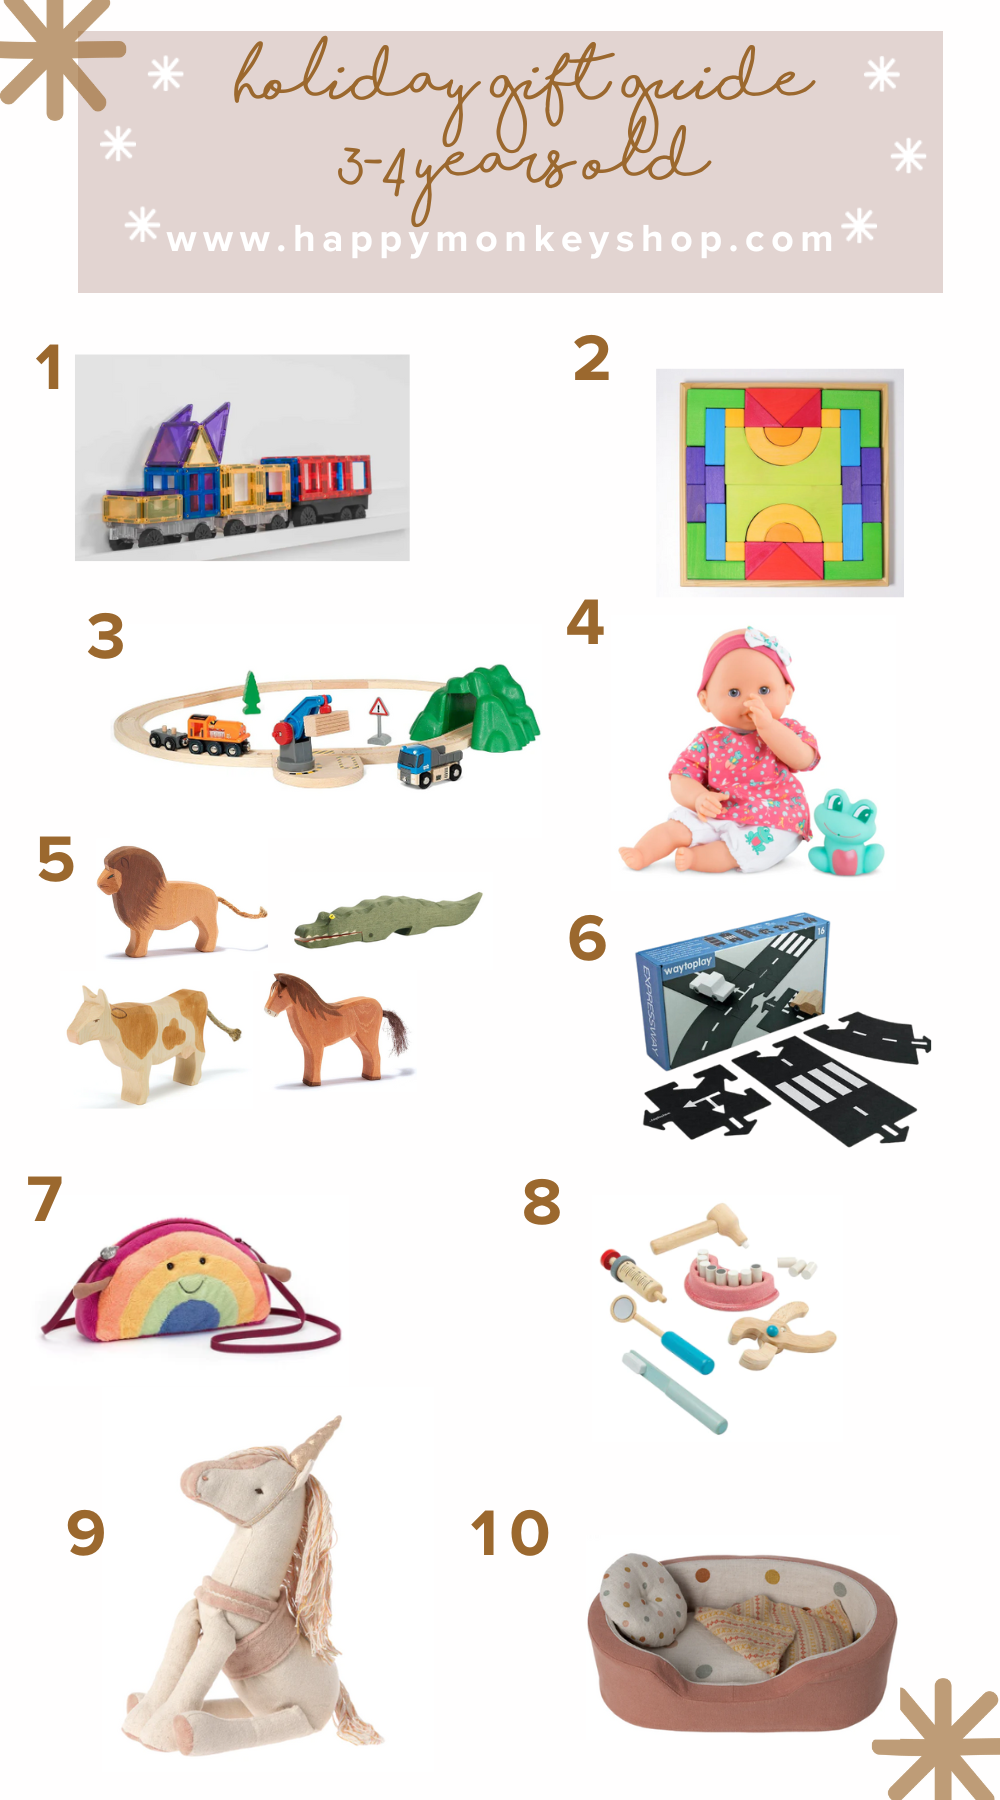 Holiday Gift Guides for 3-4 years old